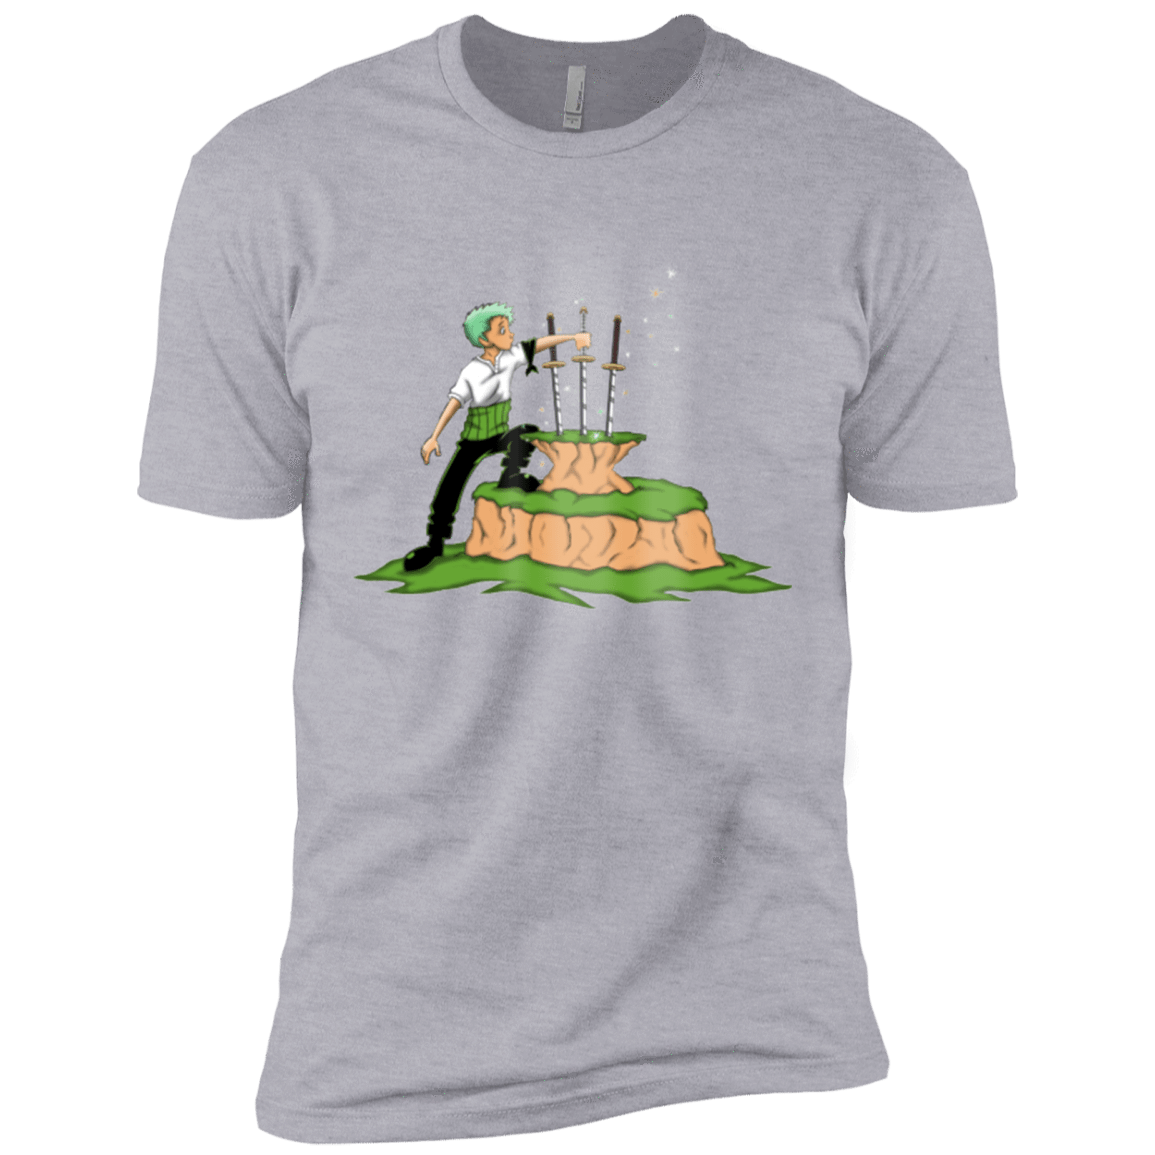 T-Shirts Heather Grey / X-Small 3 Swords in the Stone Men's Premium T-Shirt